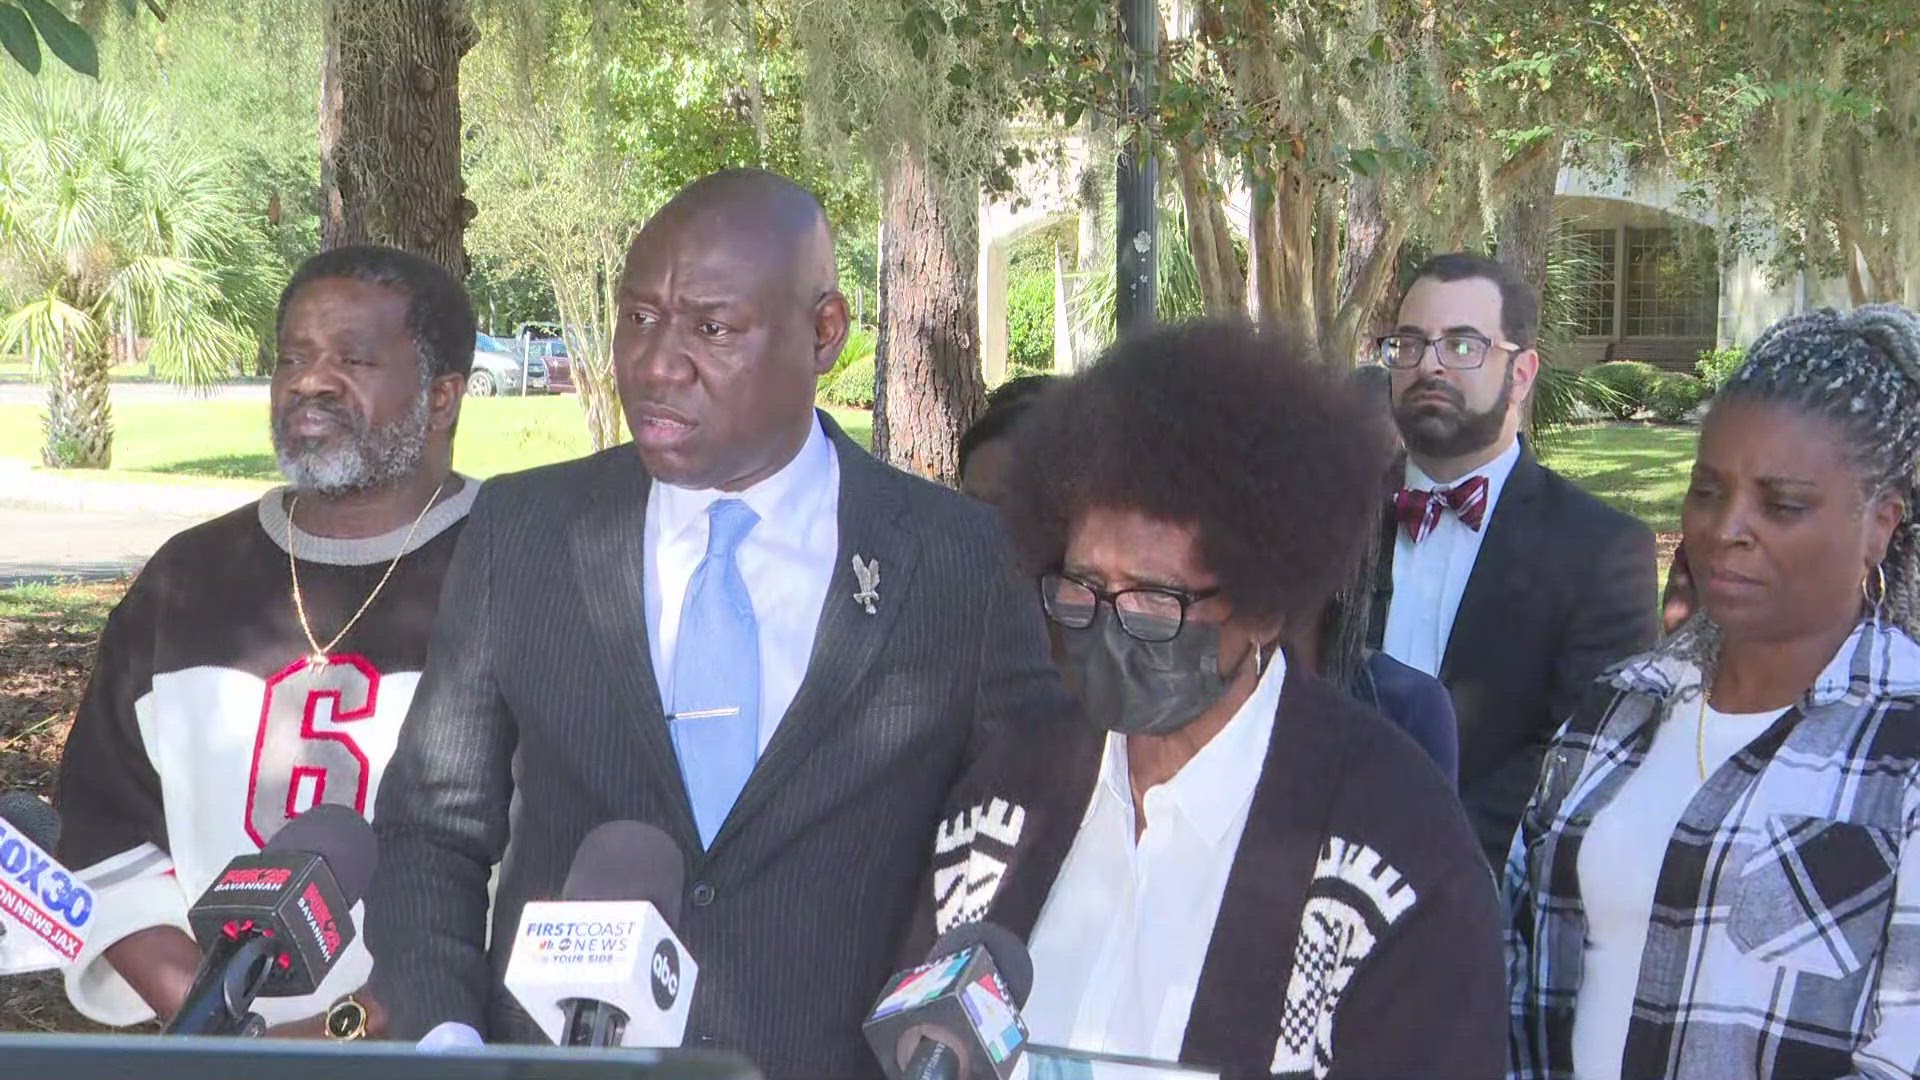 The family of Leonard Cure, 53, stood alongside Civil Rights Attorney Ben Crump Wednesday calling for justice after Cure was shot and killed during a traffic stop.